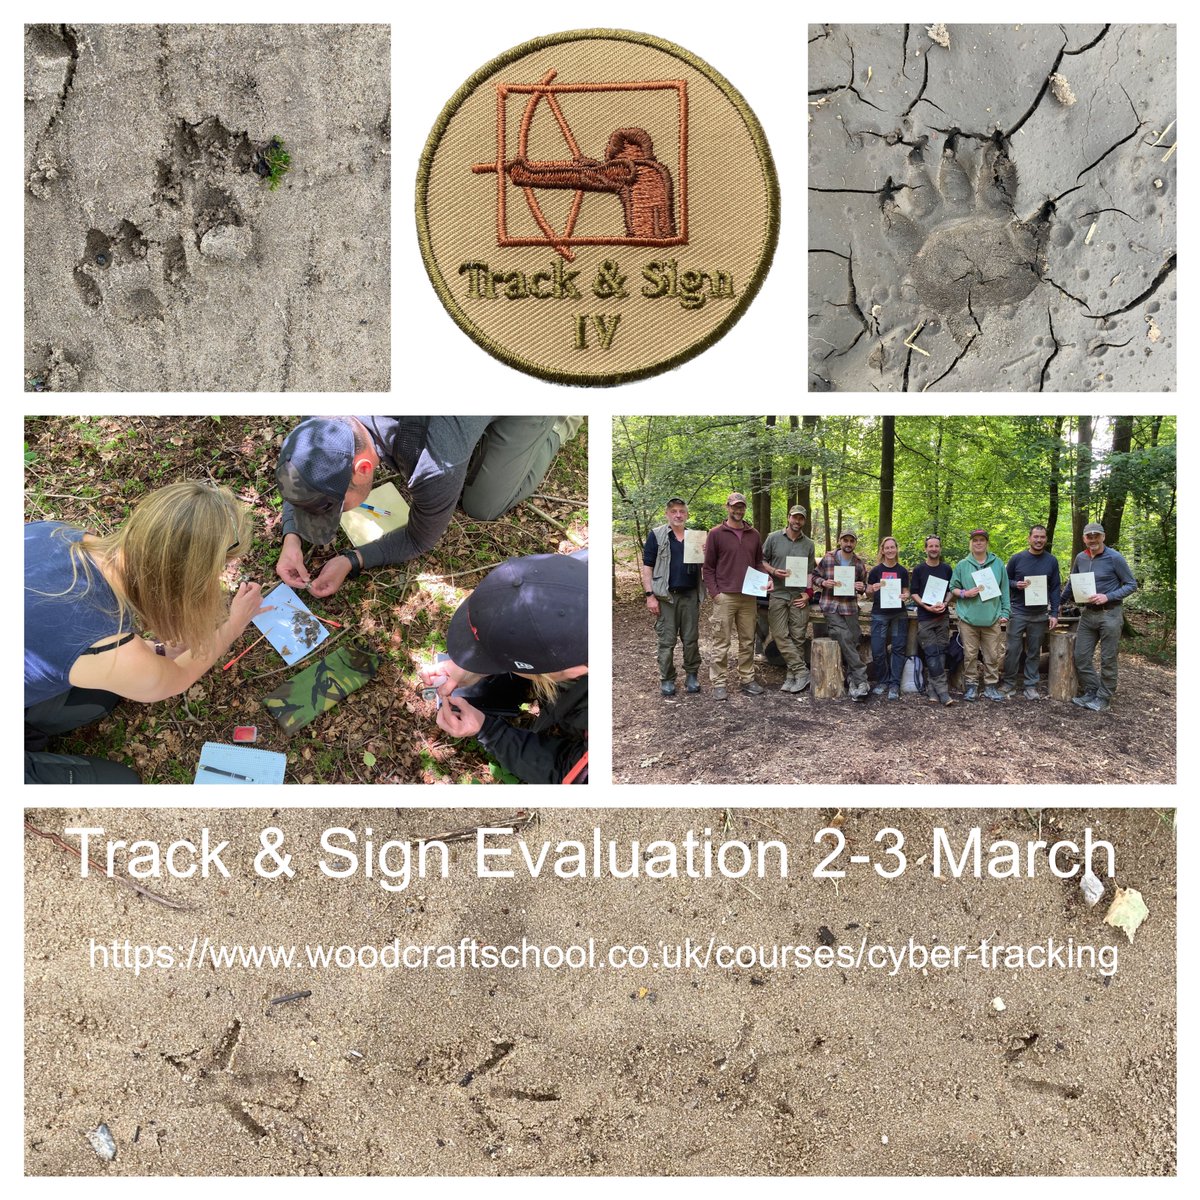 First UK CyberTracker track and sign evaluation of 2023. Suitable to for trackers of all levels. woodcraftschool.co.uk/courses/cyber-… #wildlifetracking #trackandsign #bushcraft #woodcraftschool #traditionalecologicalknowledge #wildlife